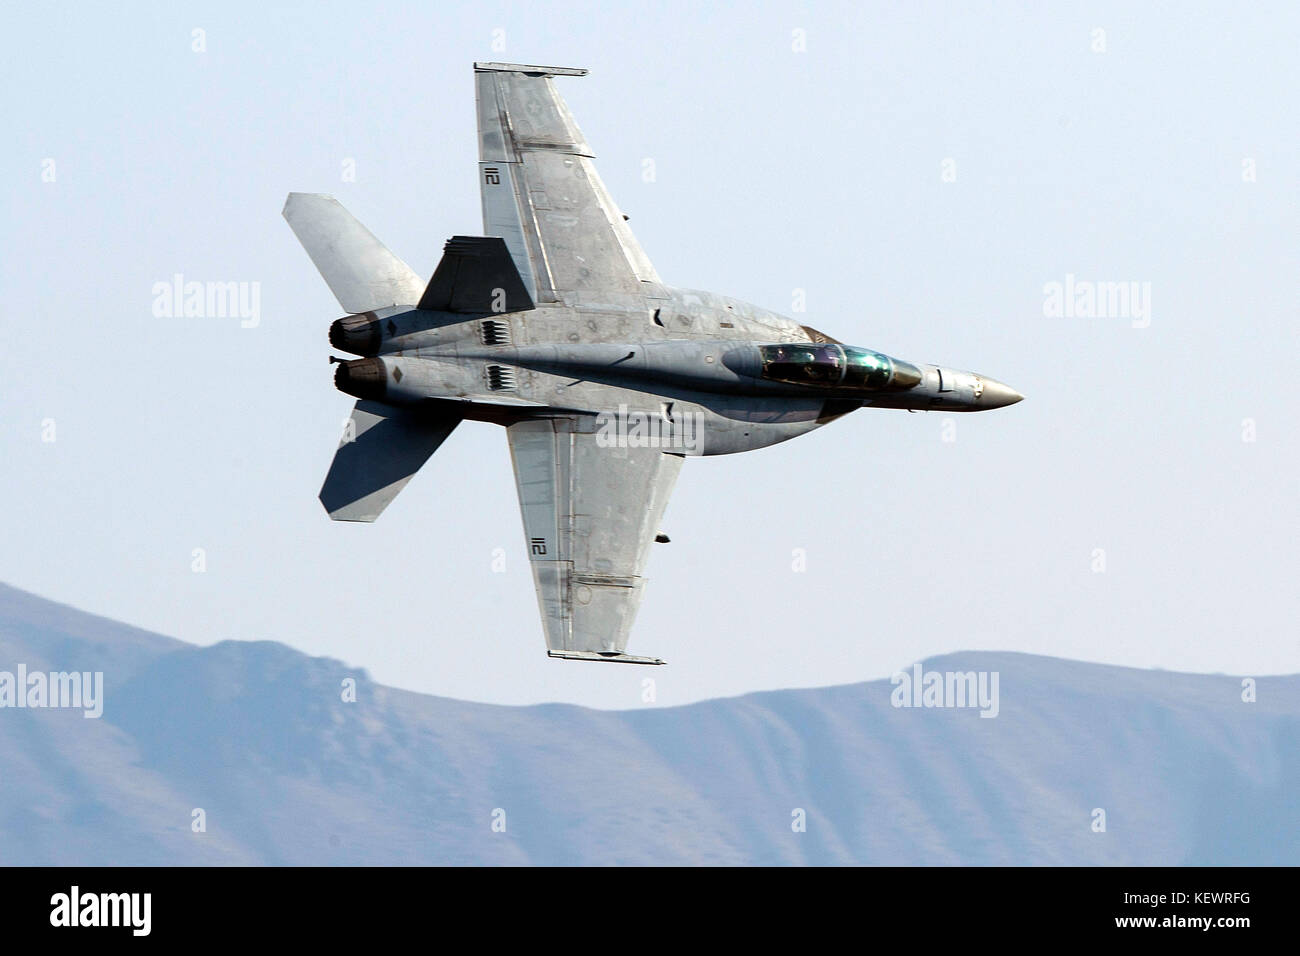 United States Navy Boeing F/A-18F Super Hornet (NE 112) from the VFA-2 Bounty Hunters squadron, Naval Air Station Lemoore, flies low level on the Jedi Transition through Star Wars Canyon / Rainbow Canyon, Death Valley National Park, Panamint Springs, California, United States of America Stock Photo